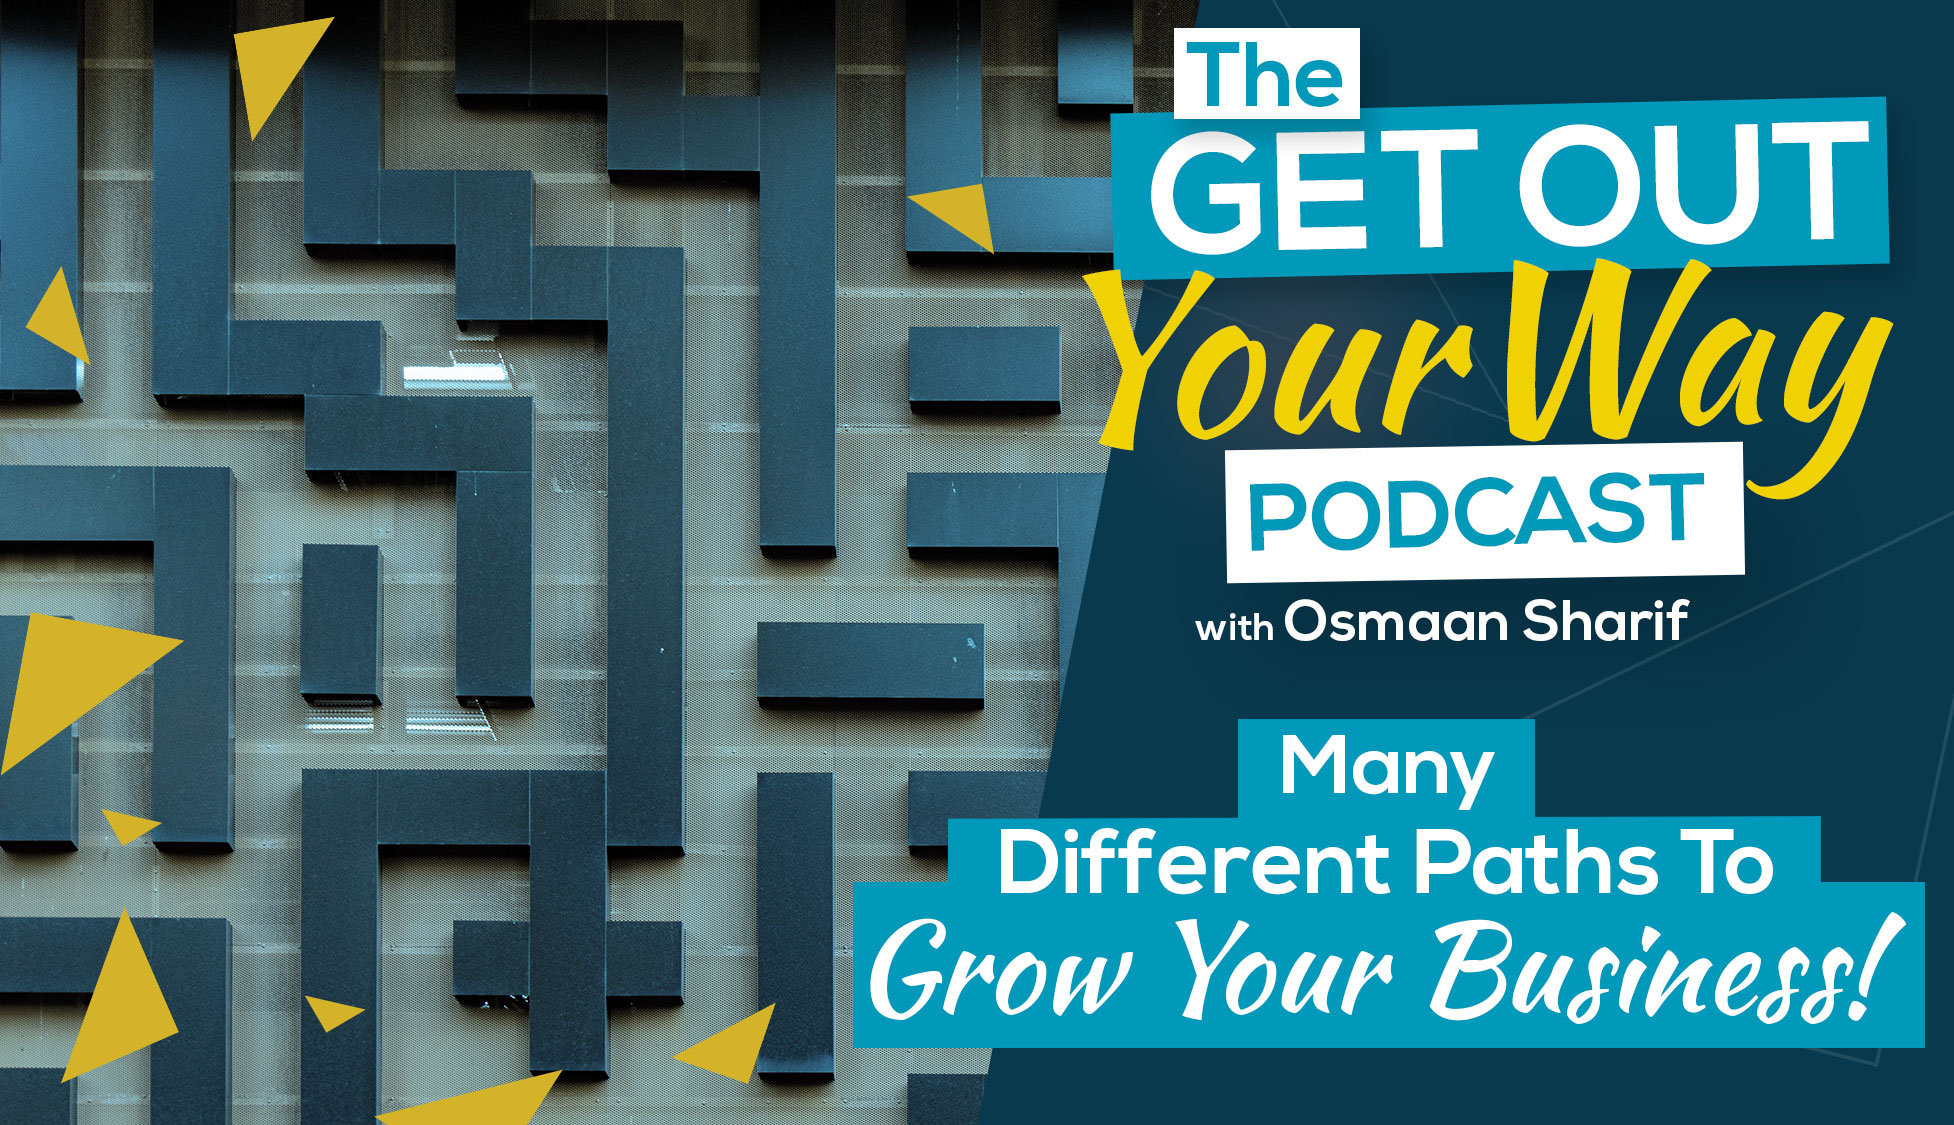 Many Different Paths To Grow Your Business